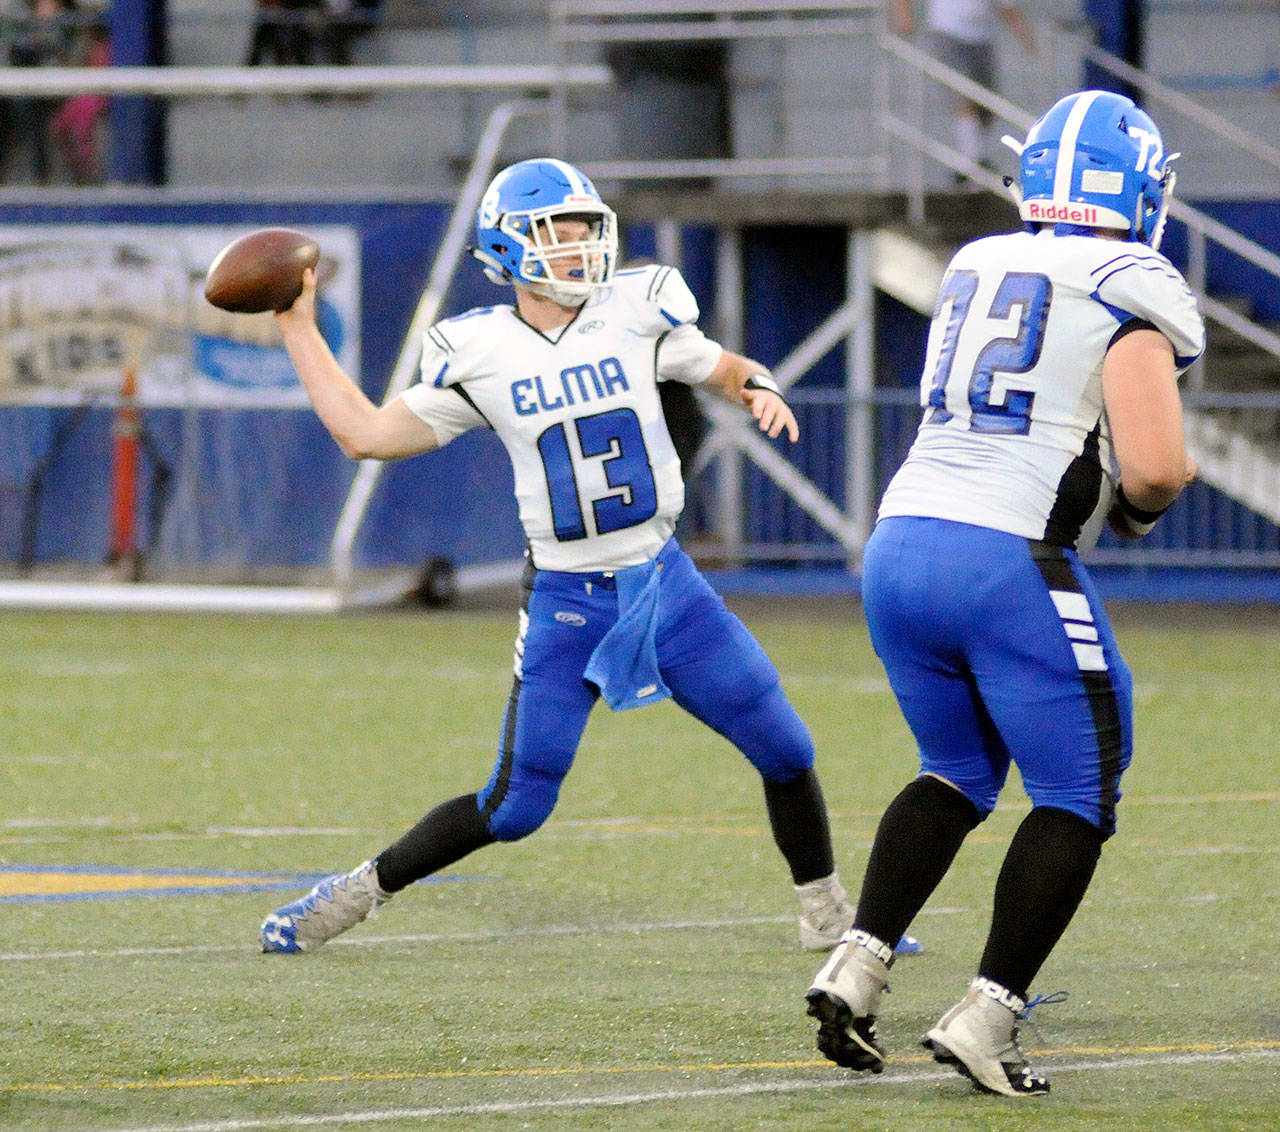 Elma’s Cody Vollan rocks back to throw a pass during a game last Friday at Stewart Field in Aberdeen. The Eagles travel to take on the Castle Rock Rockets on Friday. (Ryan Sparks | Grays Harbor News Group)